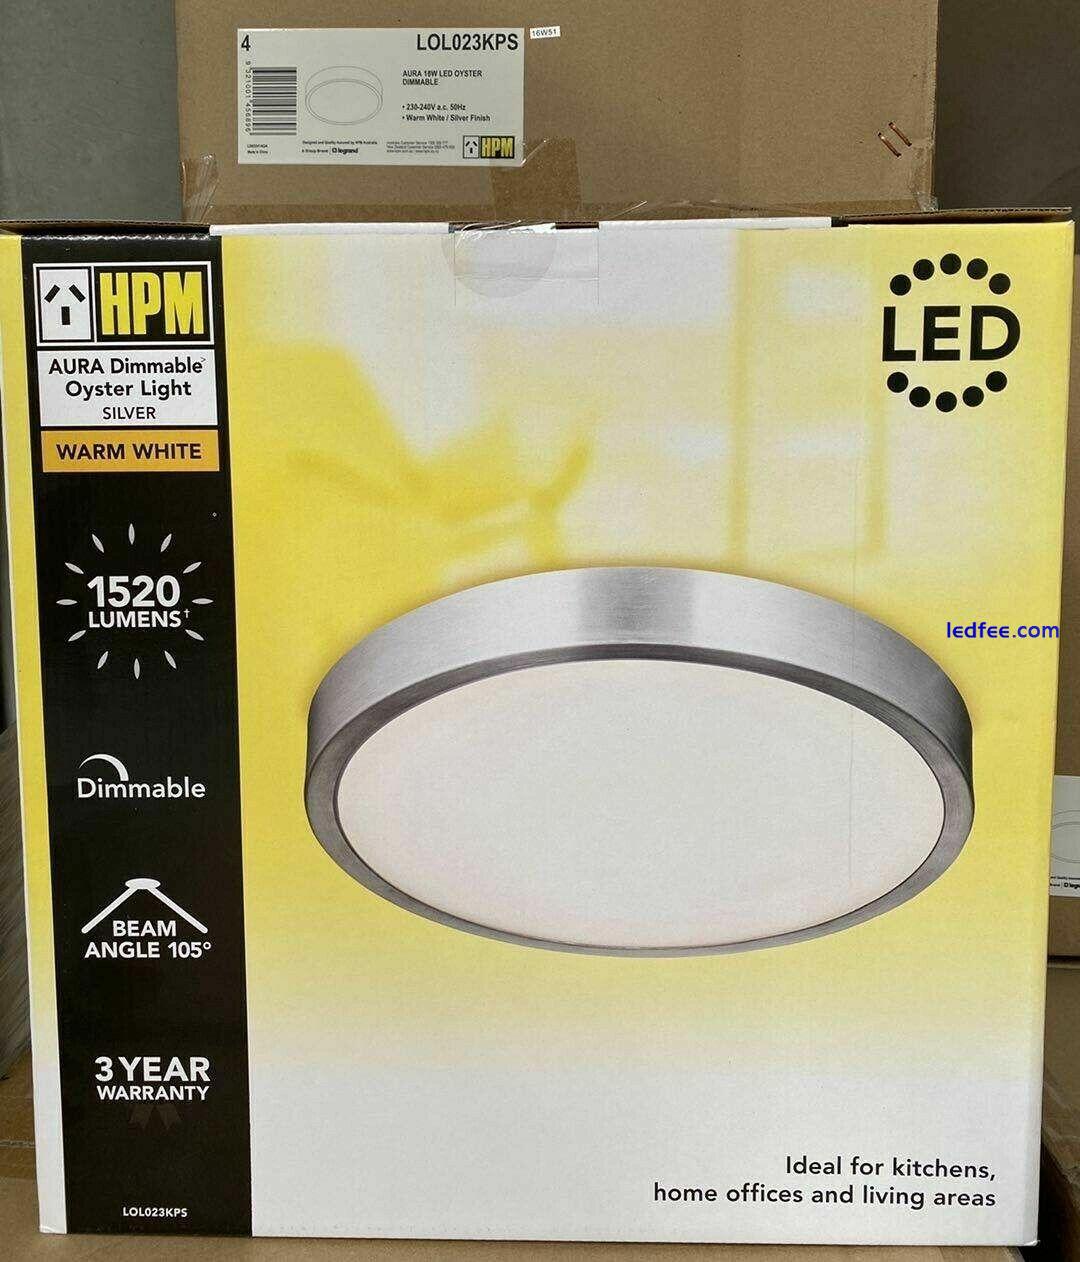 HPM LED Dimmable Ceiling Oyster Light NEW 1 